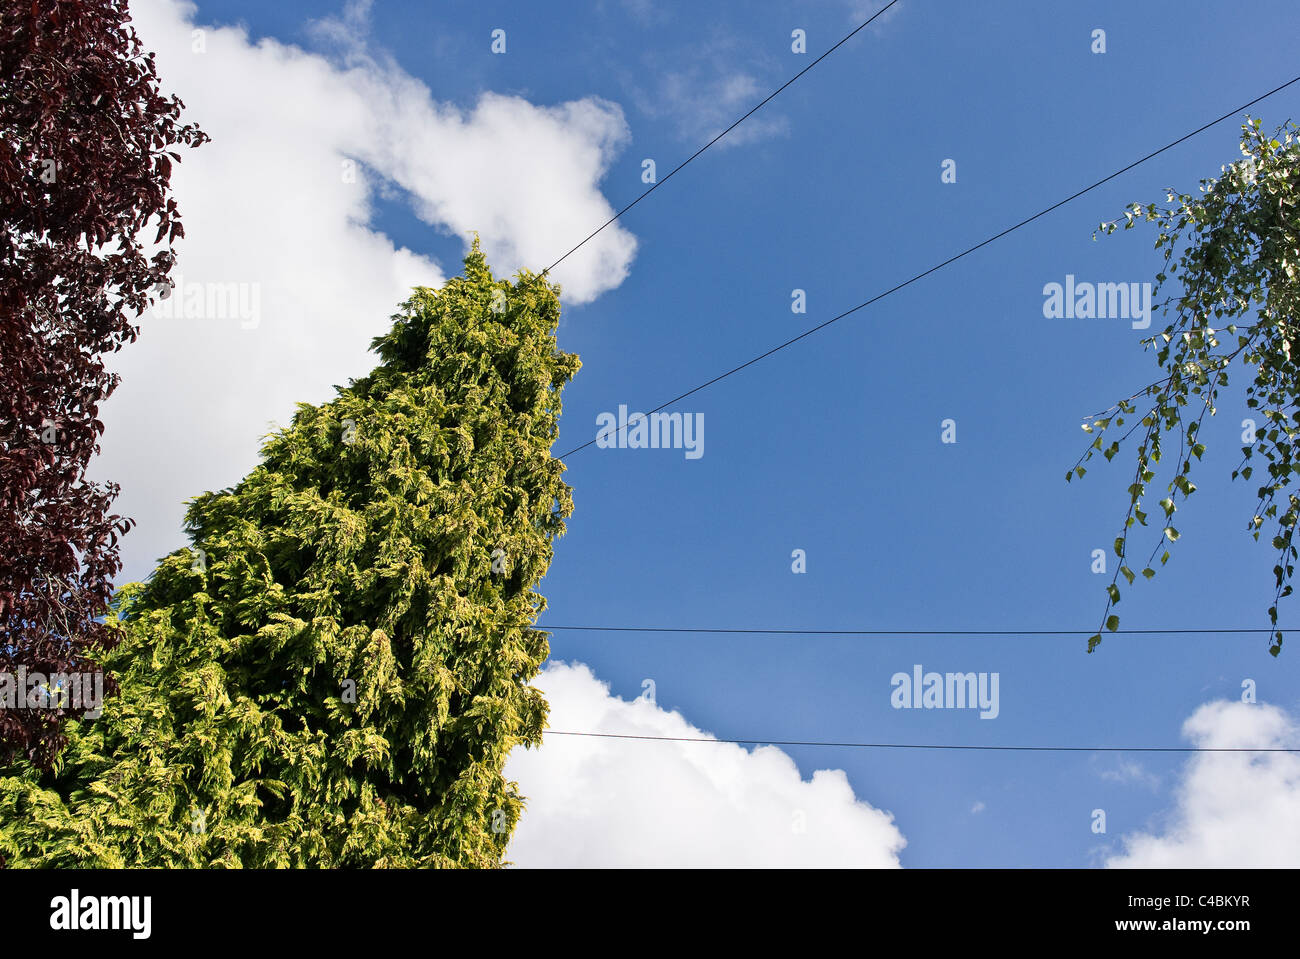 A conifer tree has grown tall and encompasses domestic telephone communications lines Stock Photo